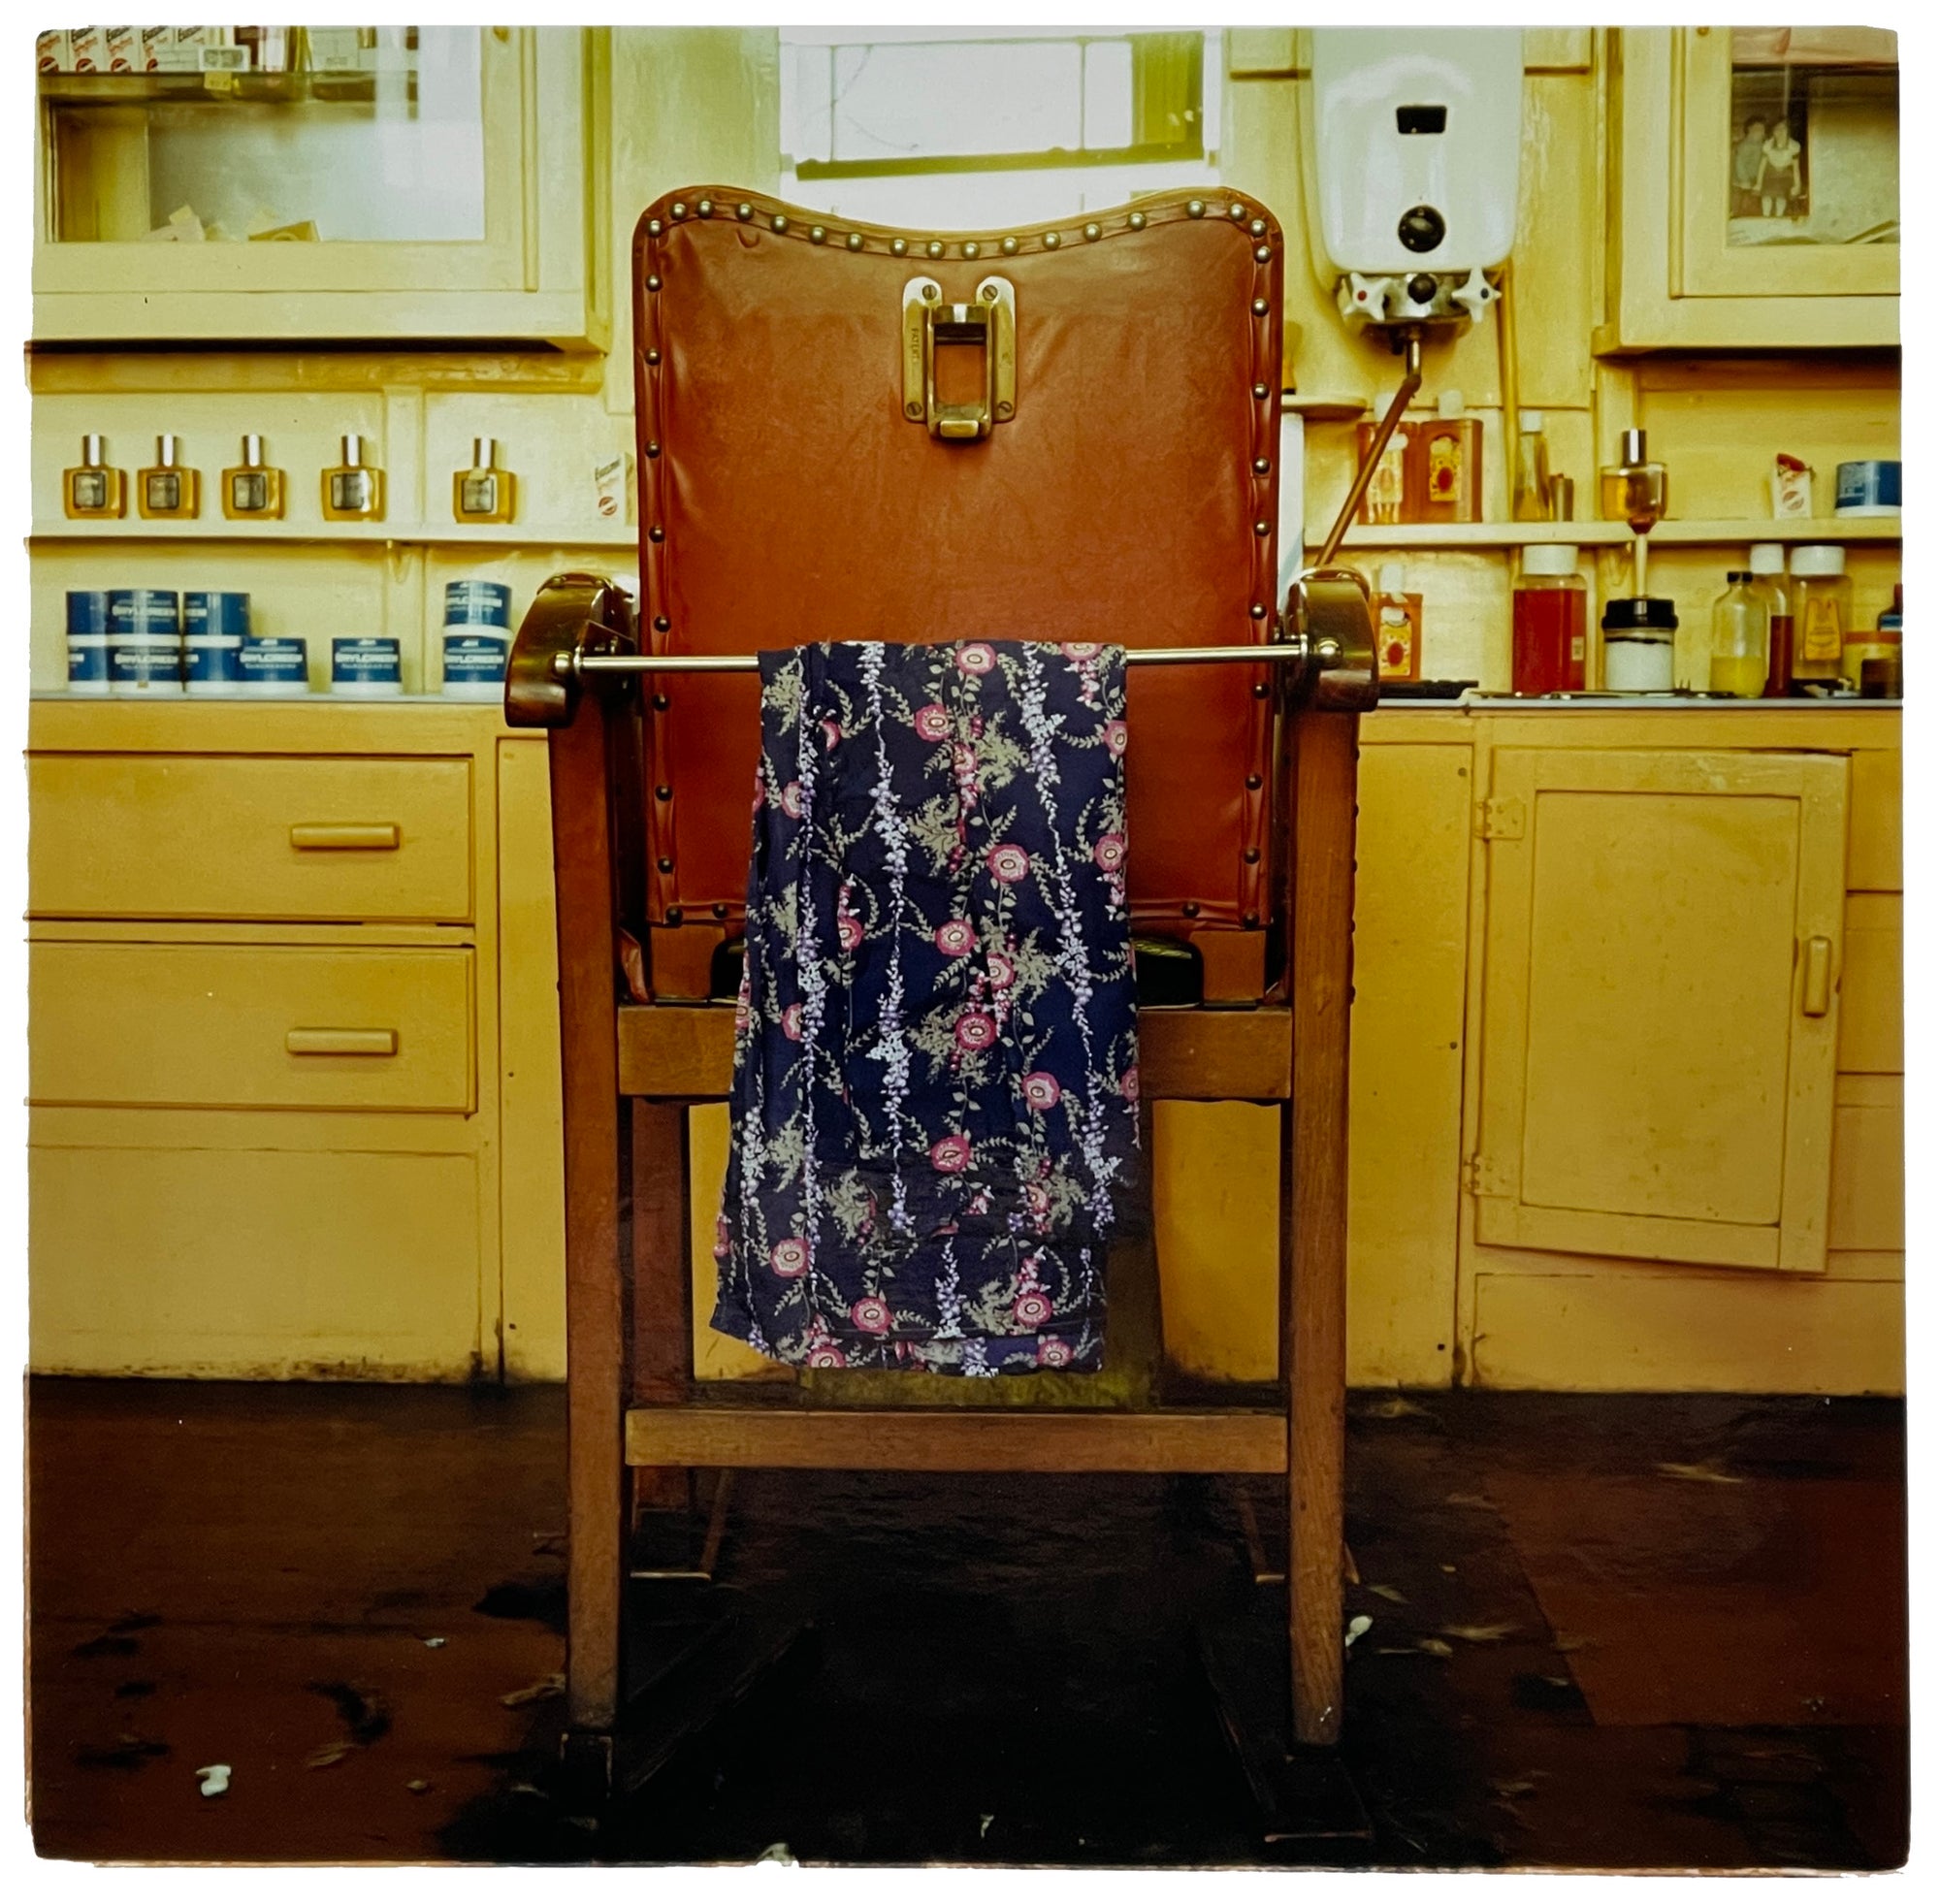 Photograph by Richard Heeps. An antique barbers chair, with a customer robe draped over the front, sits in front of an aged yellow side board on which sits many barber type lotions. There is a water heater sitting on the wall above the sideboard